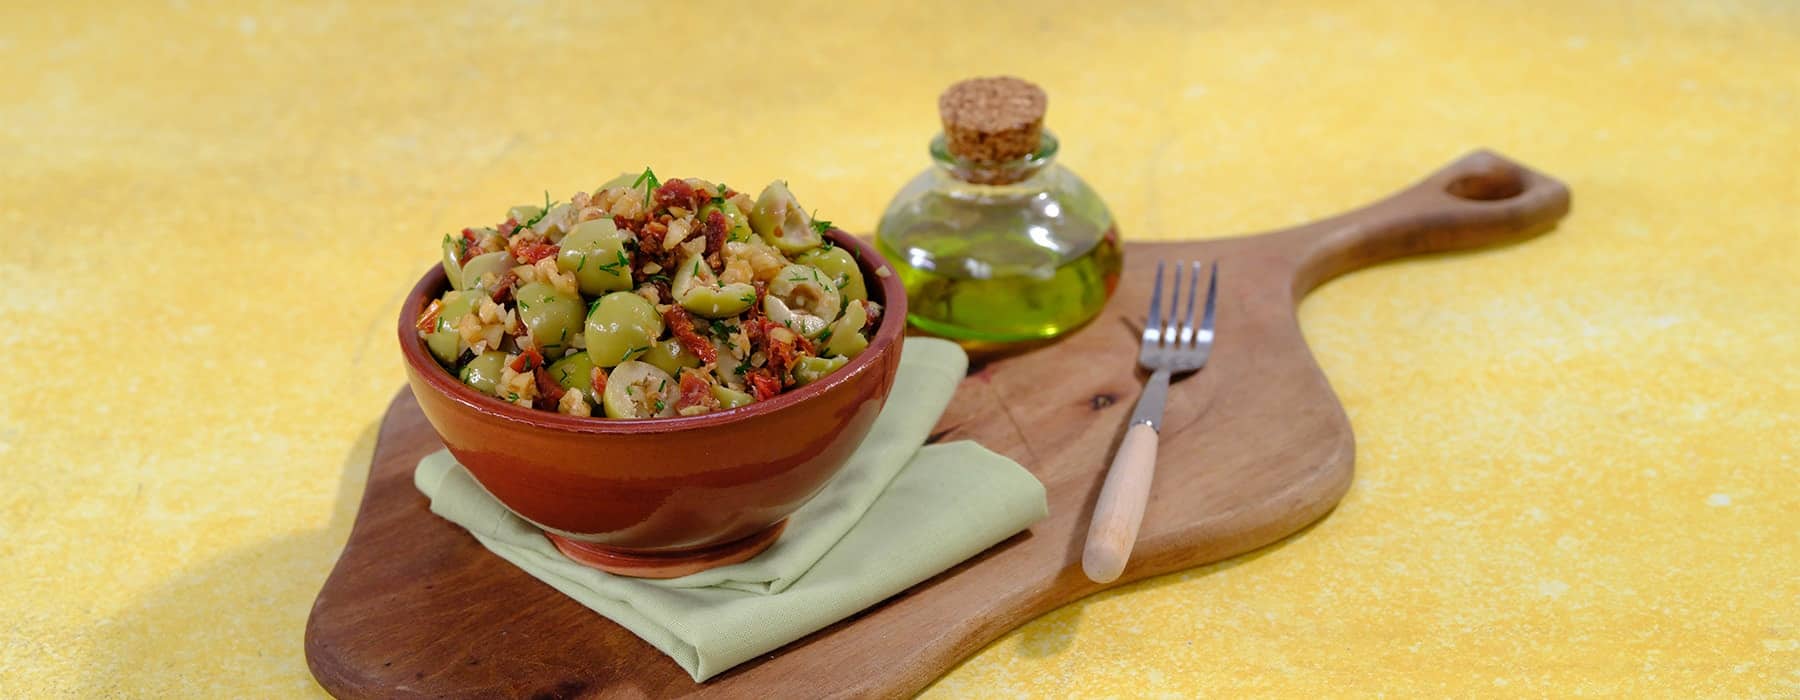 Olive Salad with Walnuts and Dried Tomatoes